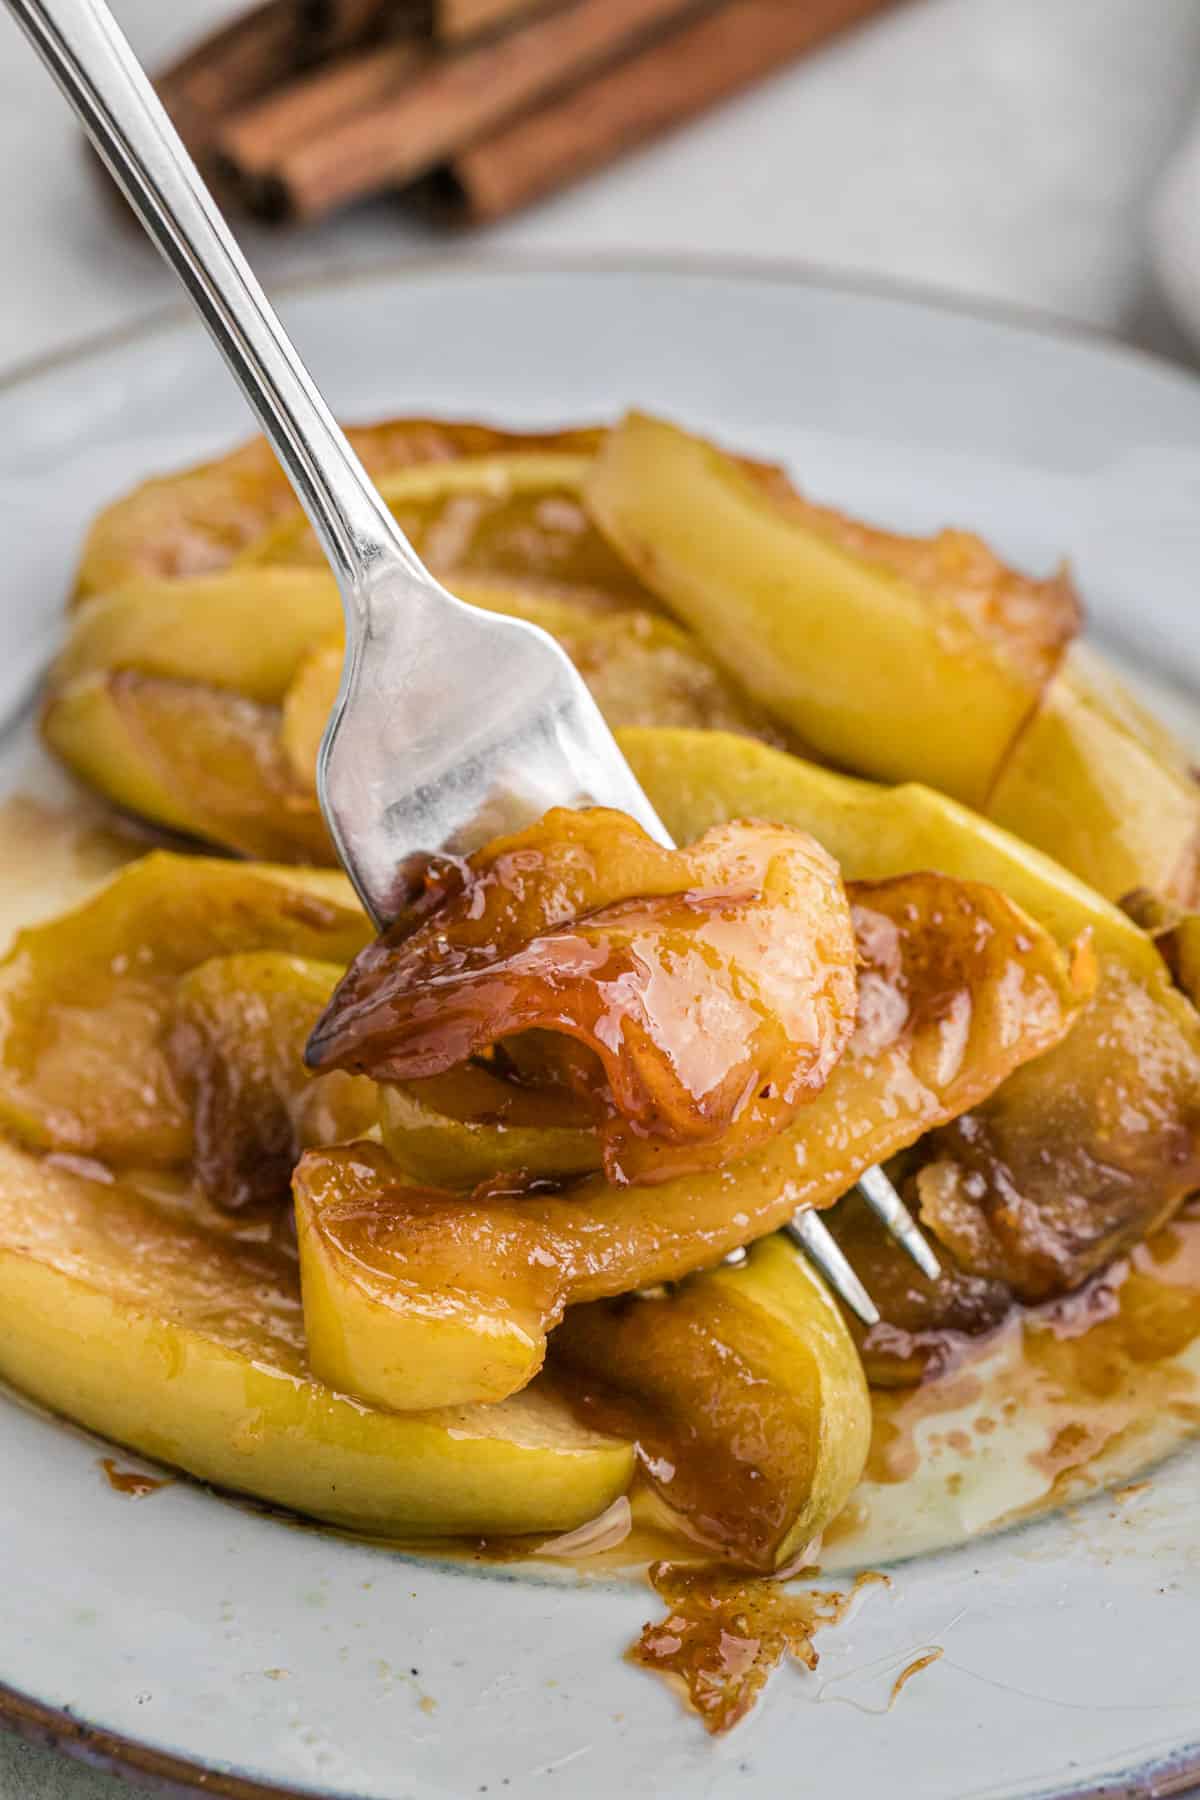 A Southern fried apple recipe on a white plate with a fork serving some up to eat